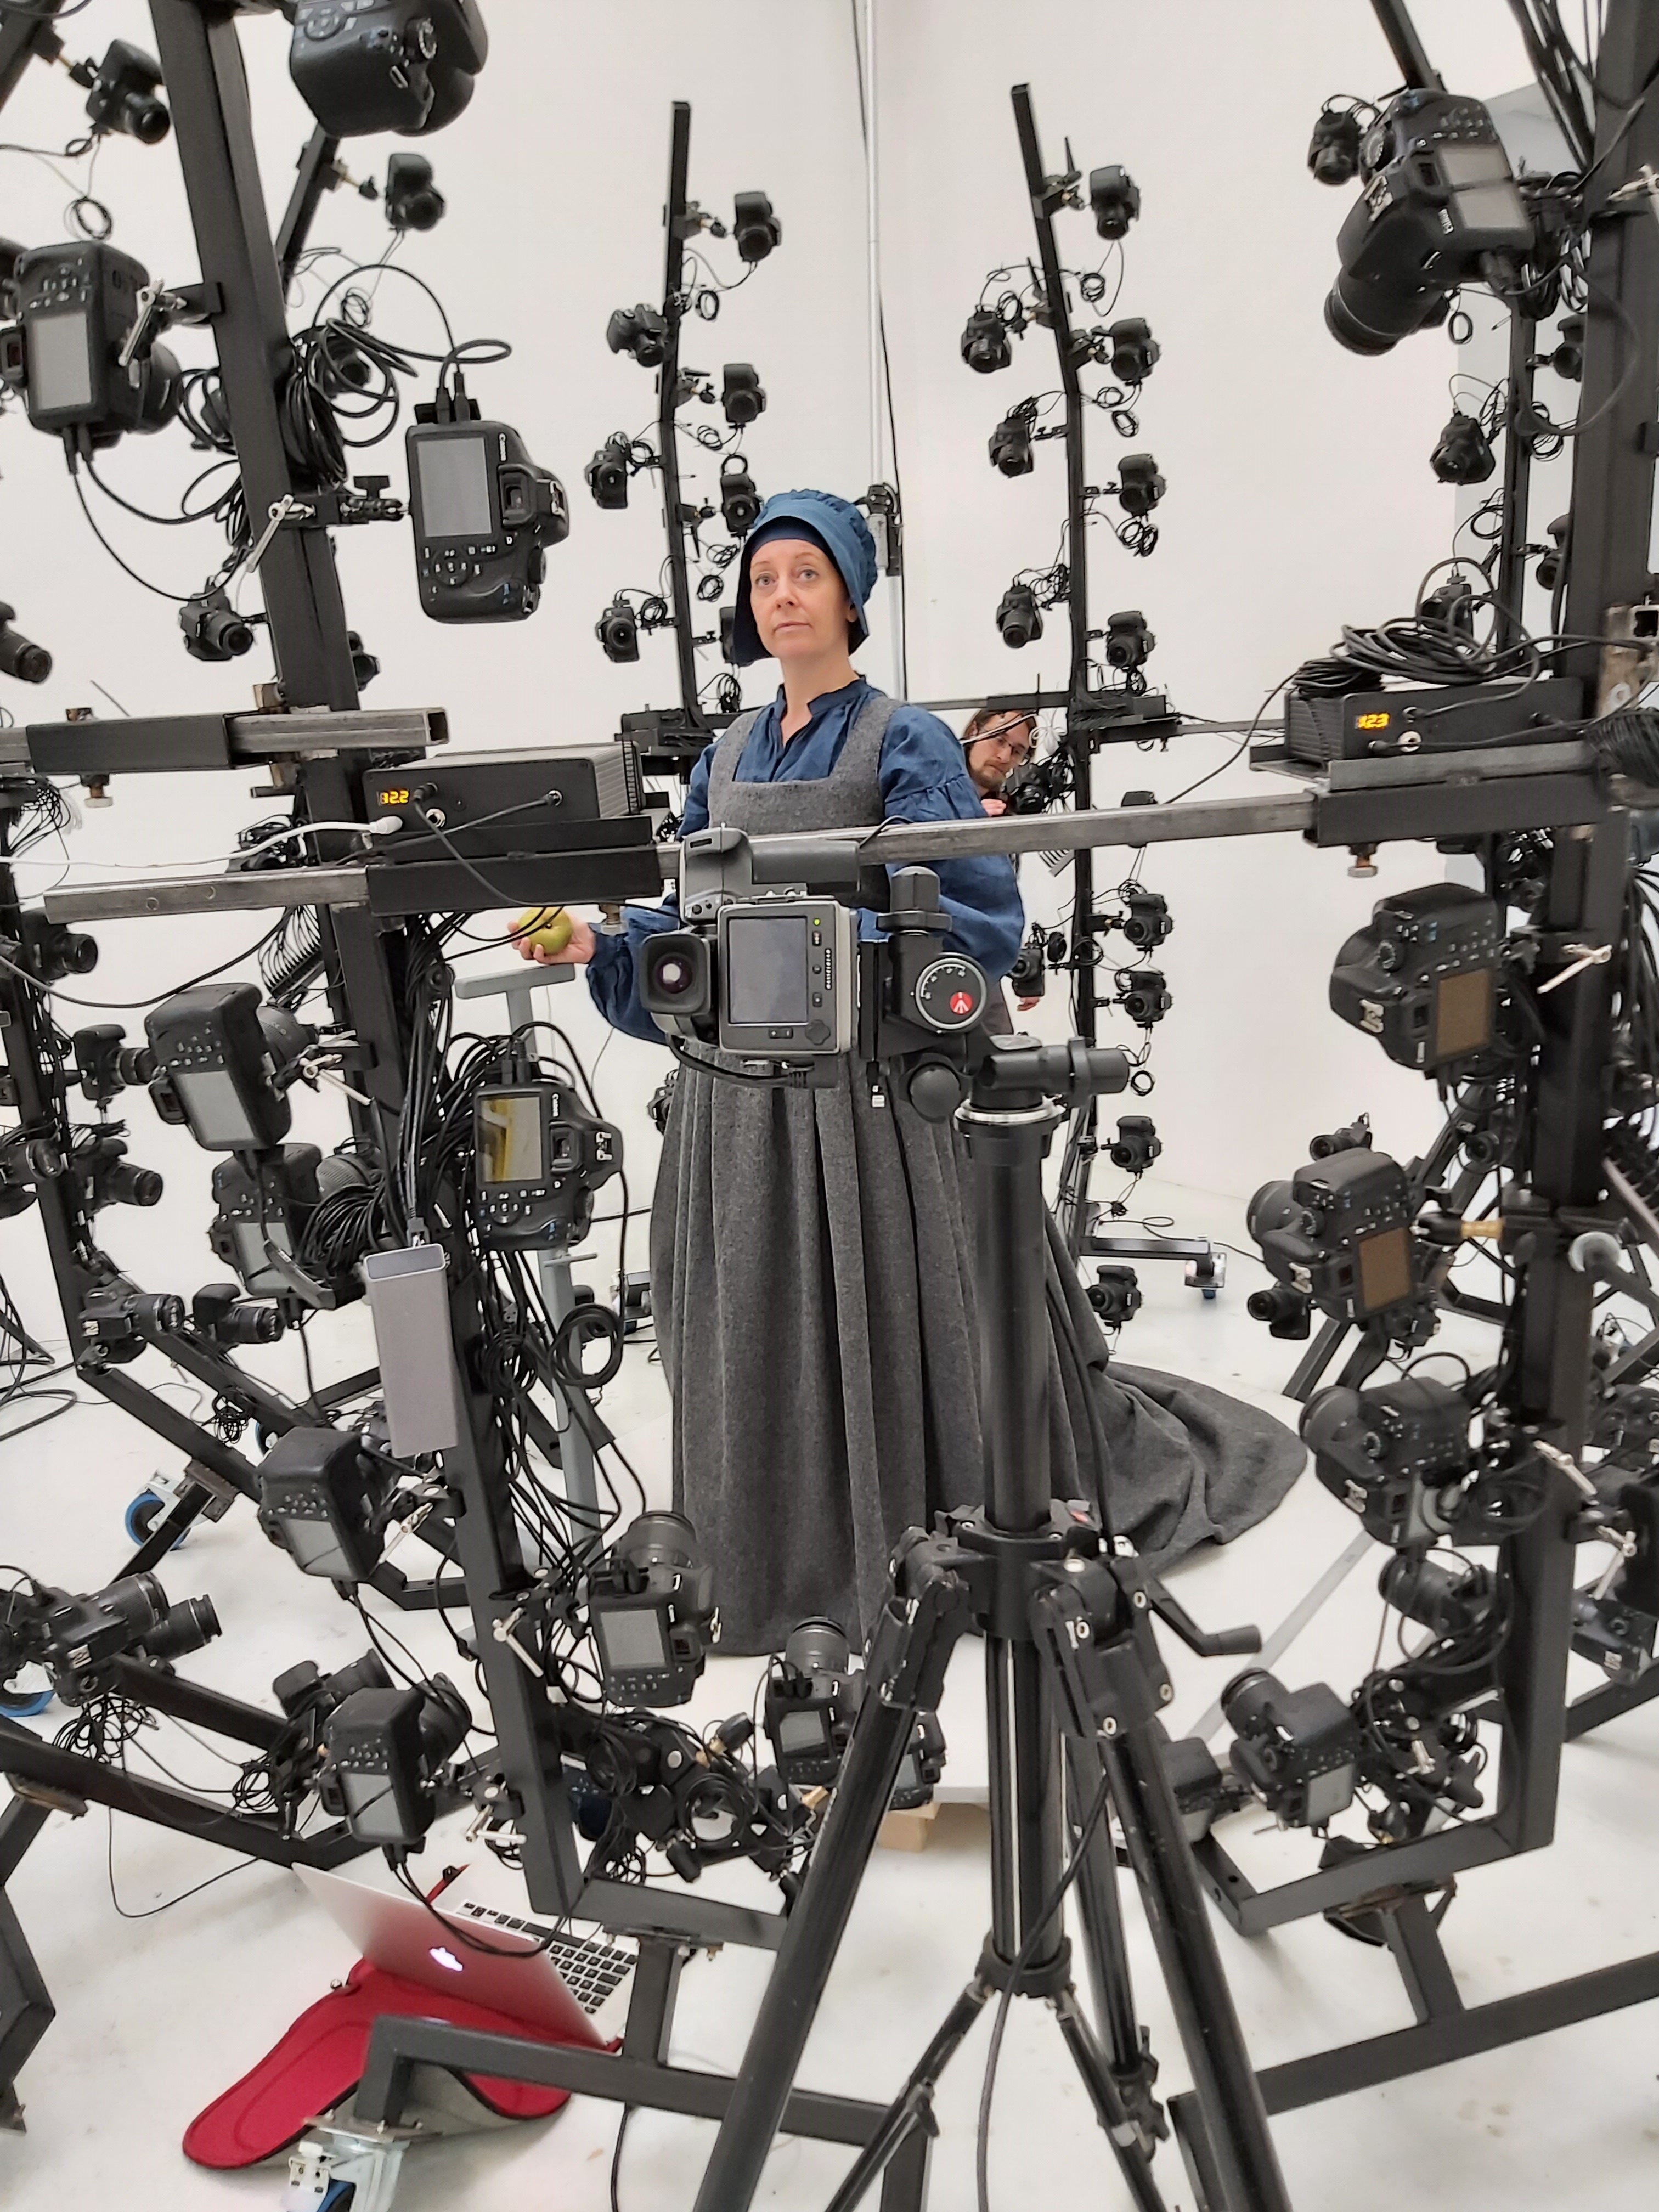 A woman stands, surround by cameras on a circular rig.